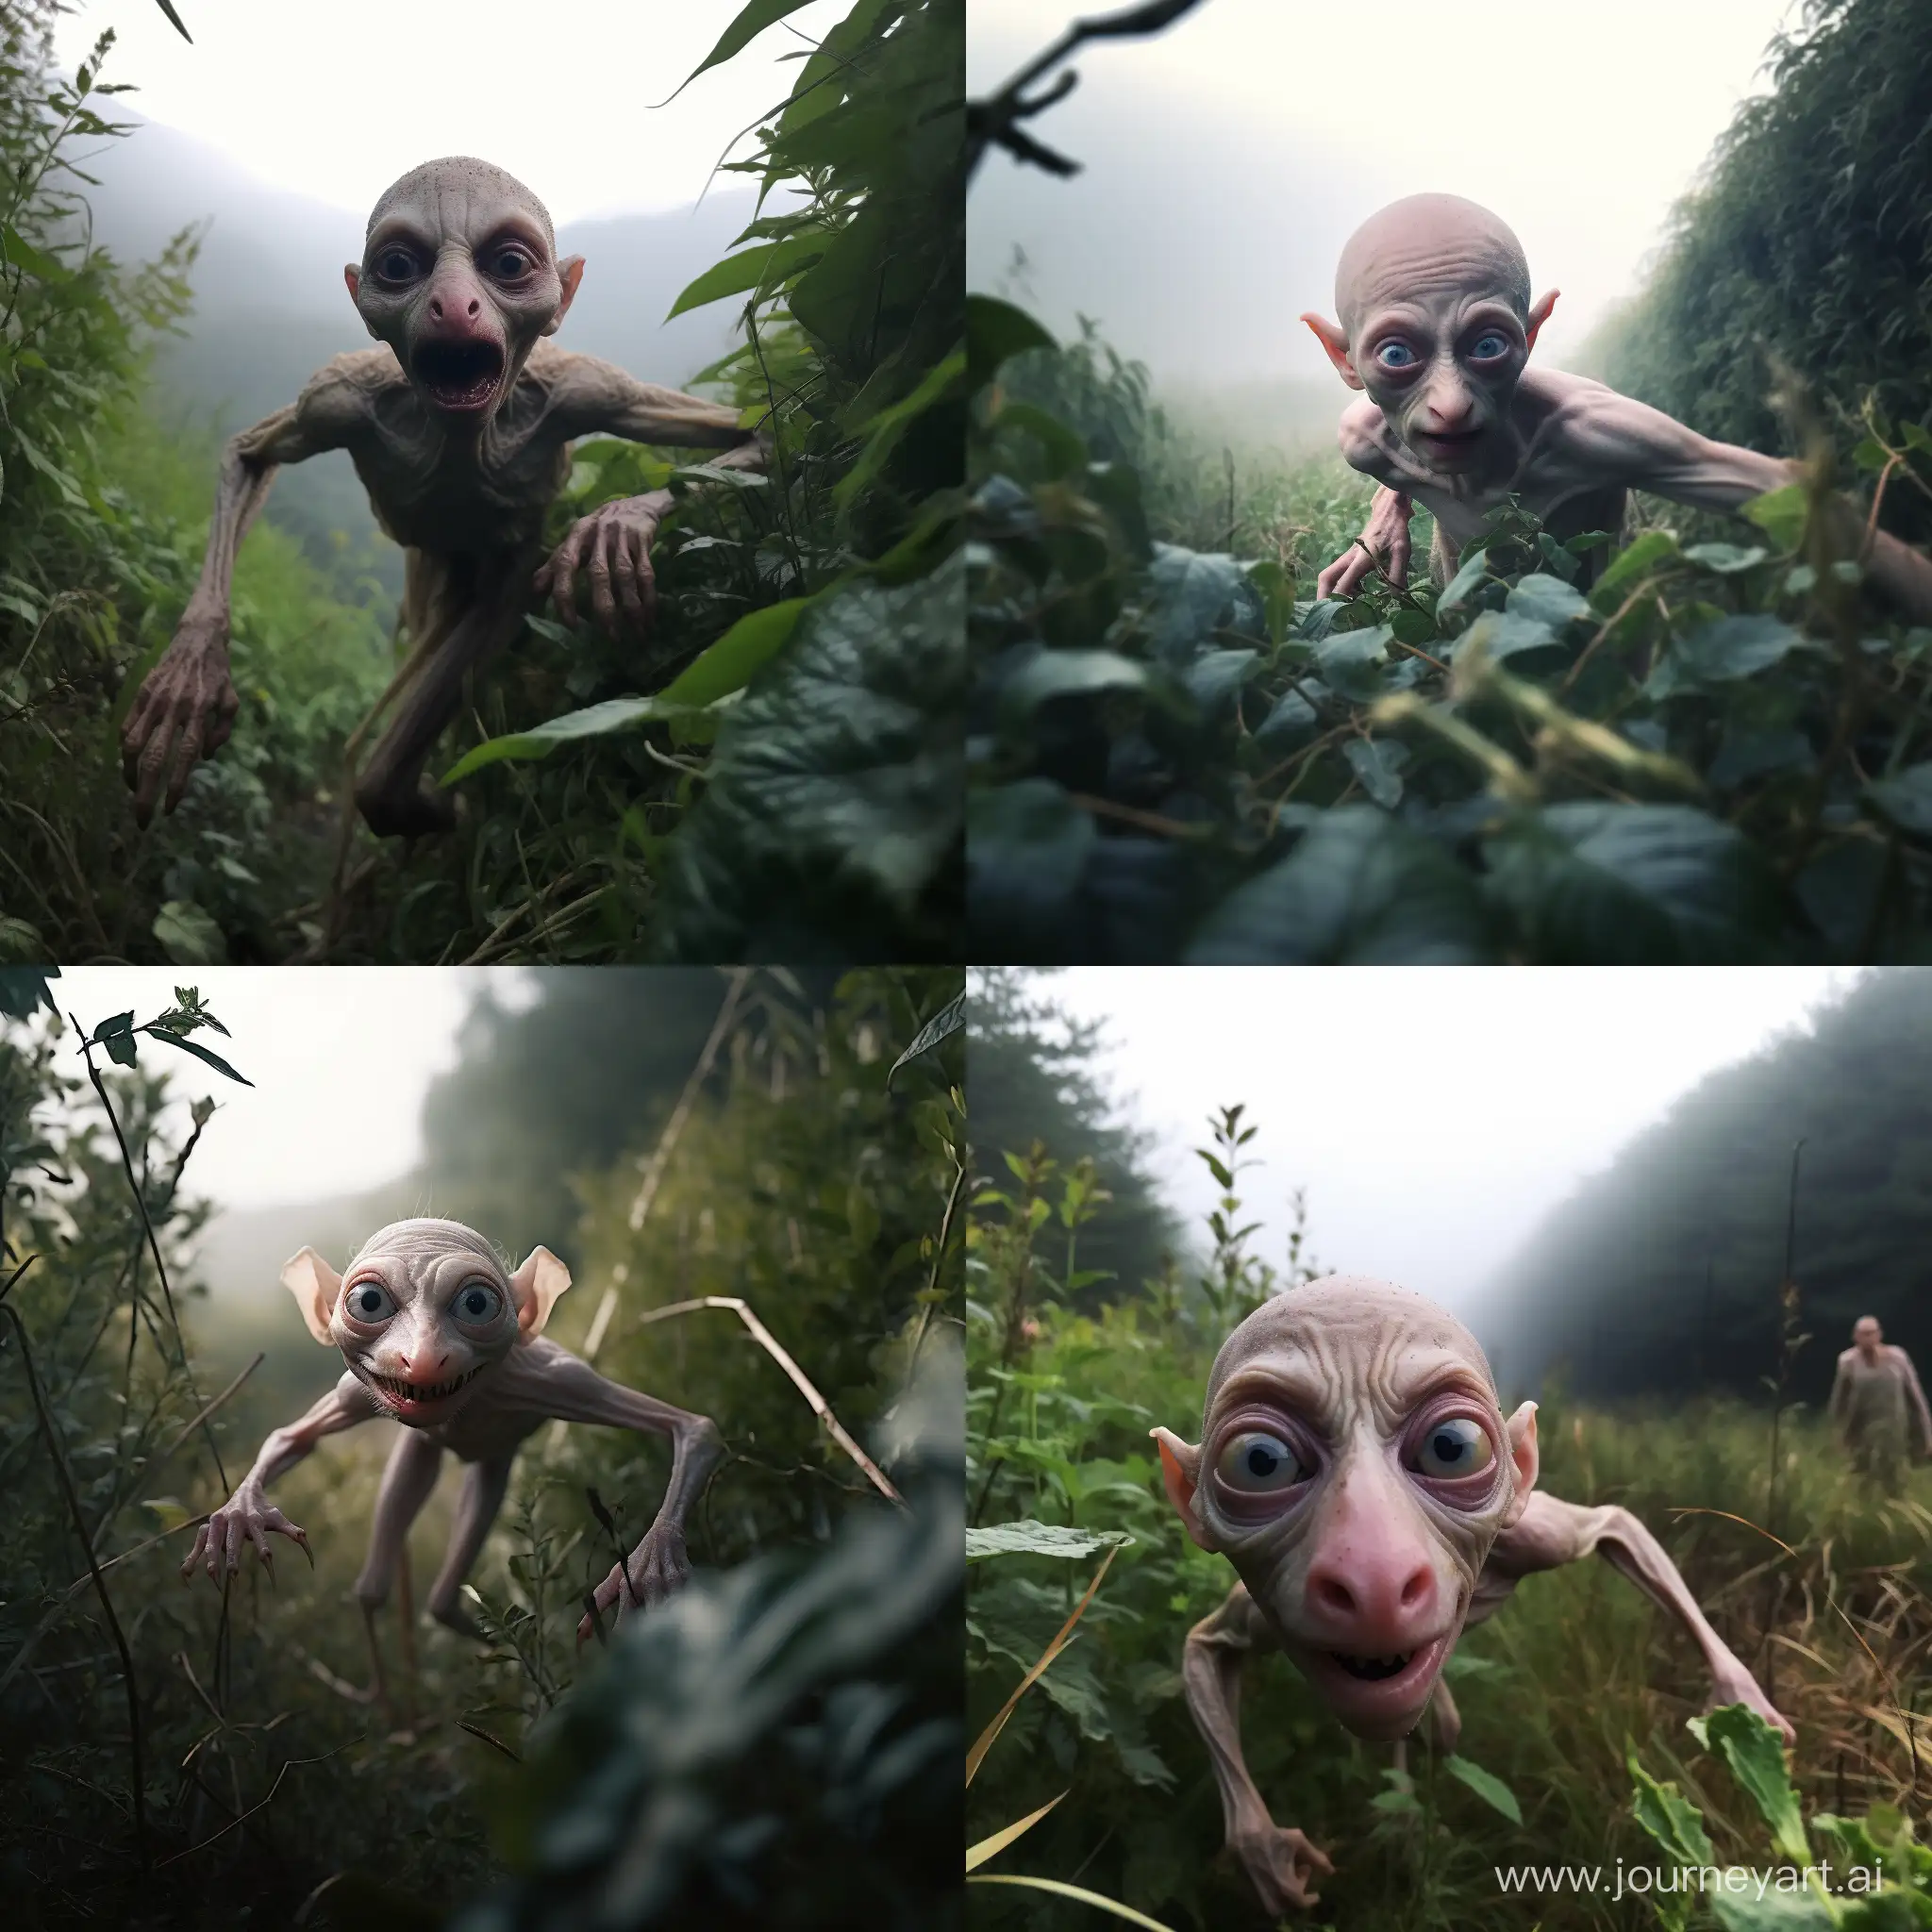 a picture being taken of a cryptid sighting of Dobby as he runs into the bushes. Dobby has gone completely insane. He turns his head and creepily looks into the camera as he makes his getaway. There's a thick fog, and the scene is dimly lit